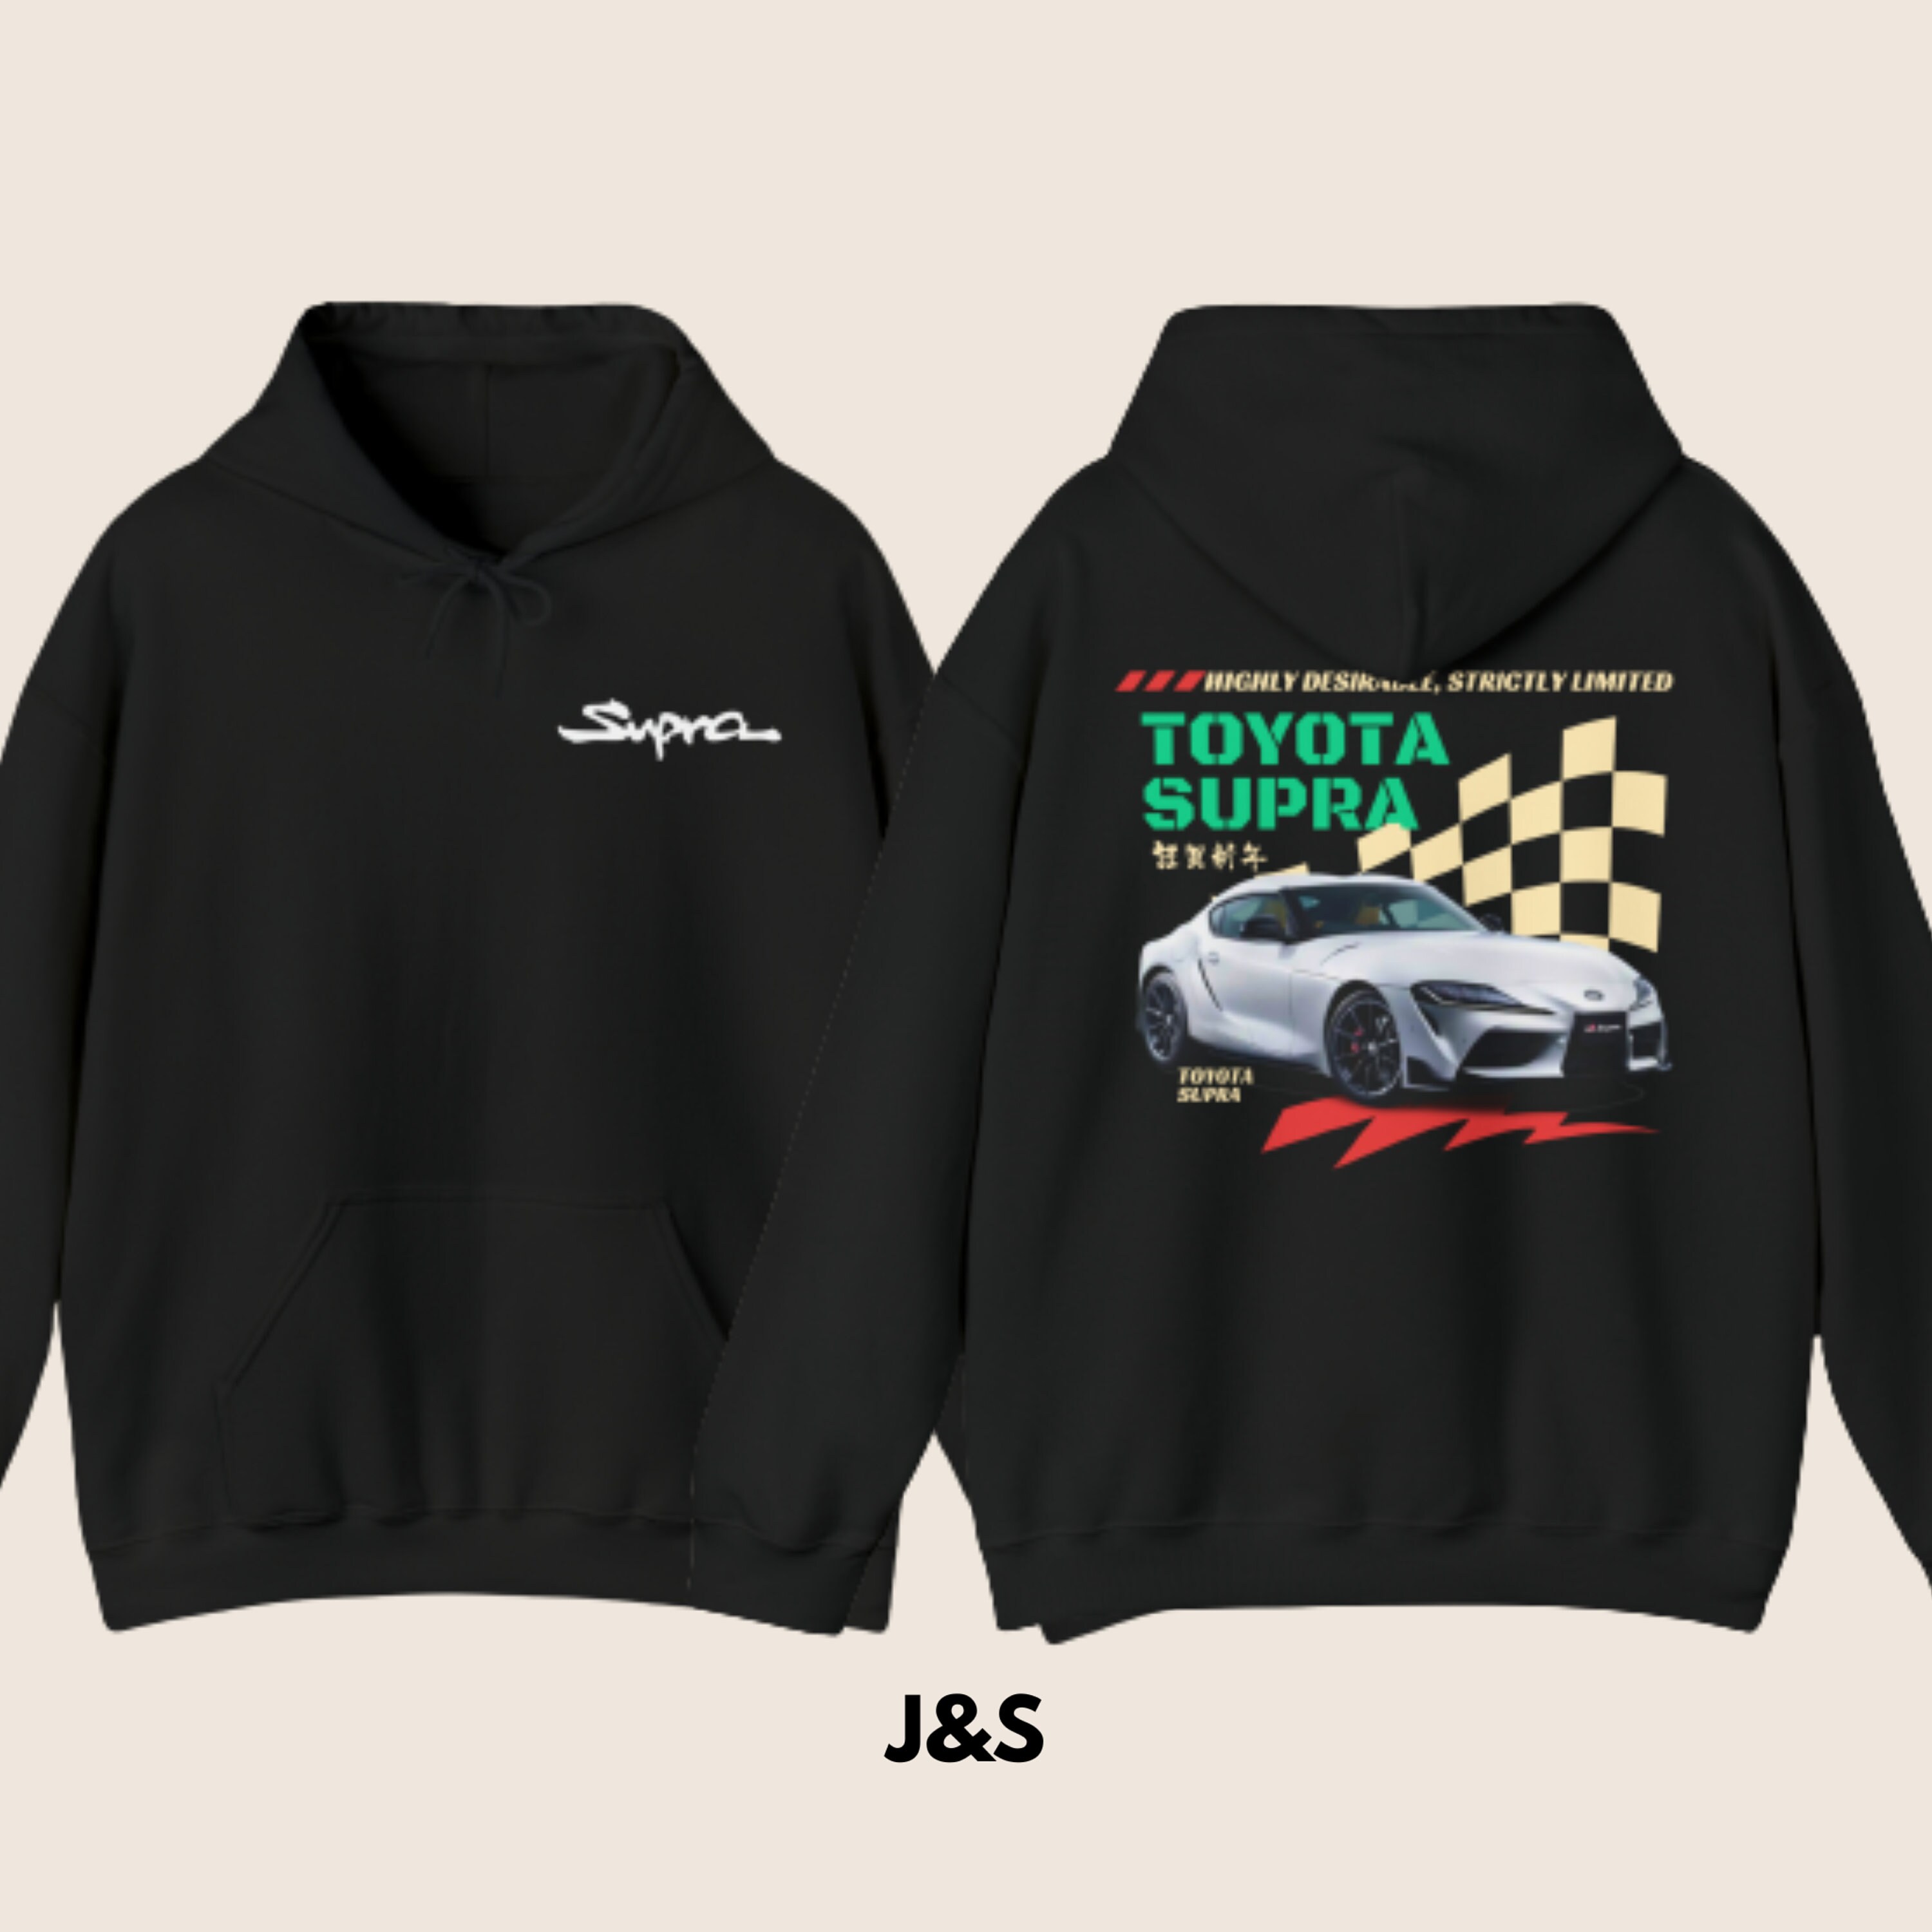 Comfy Supra Embroidered Pullover Hoodie, Race Car Hoodie, Trendy Car  Designs, Sports Car Clothing, High Quality Apparel 